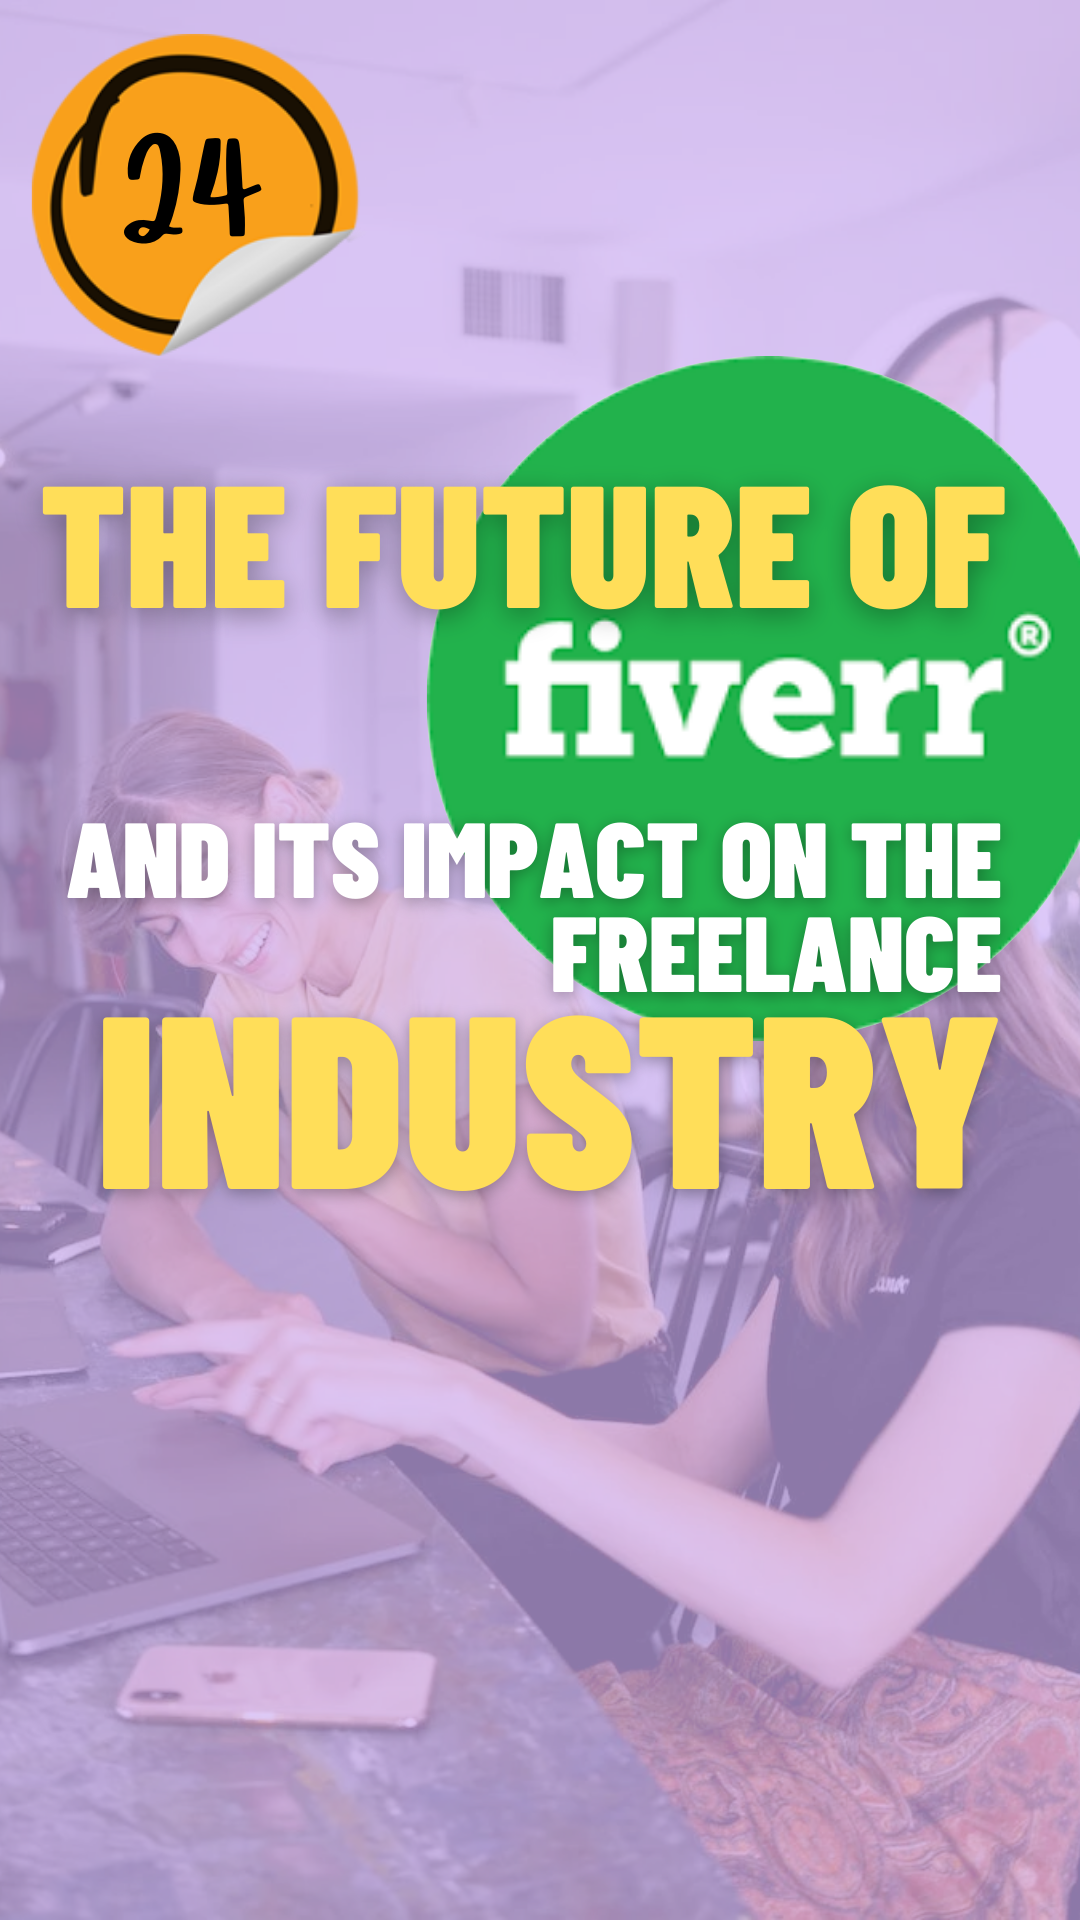 The Future of Fiverr and its impact on the freelance industry